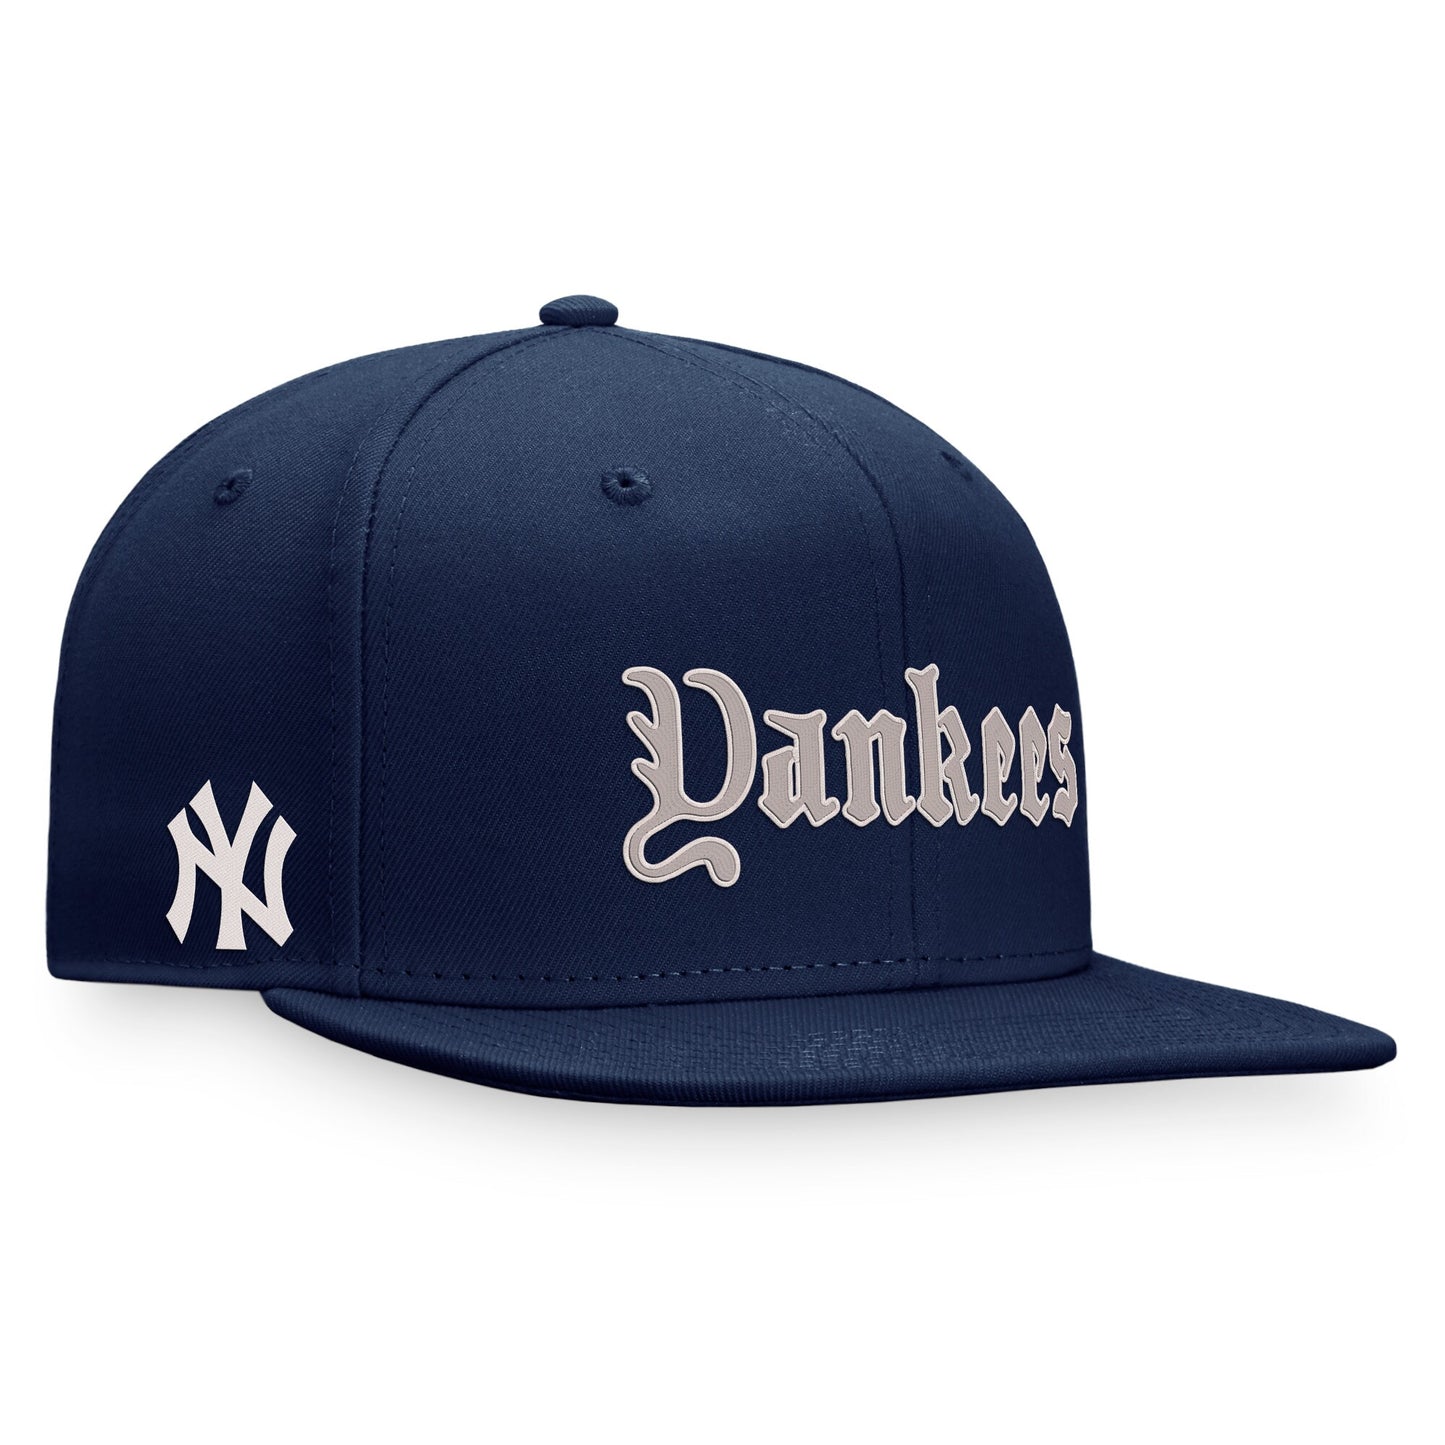 New York Yankees Fanatics Branded Gothic Script Fitted Hat - Navy